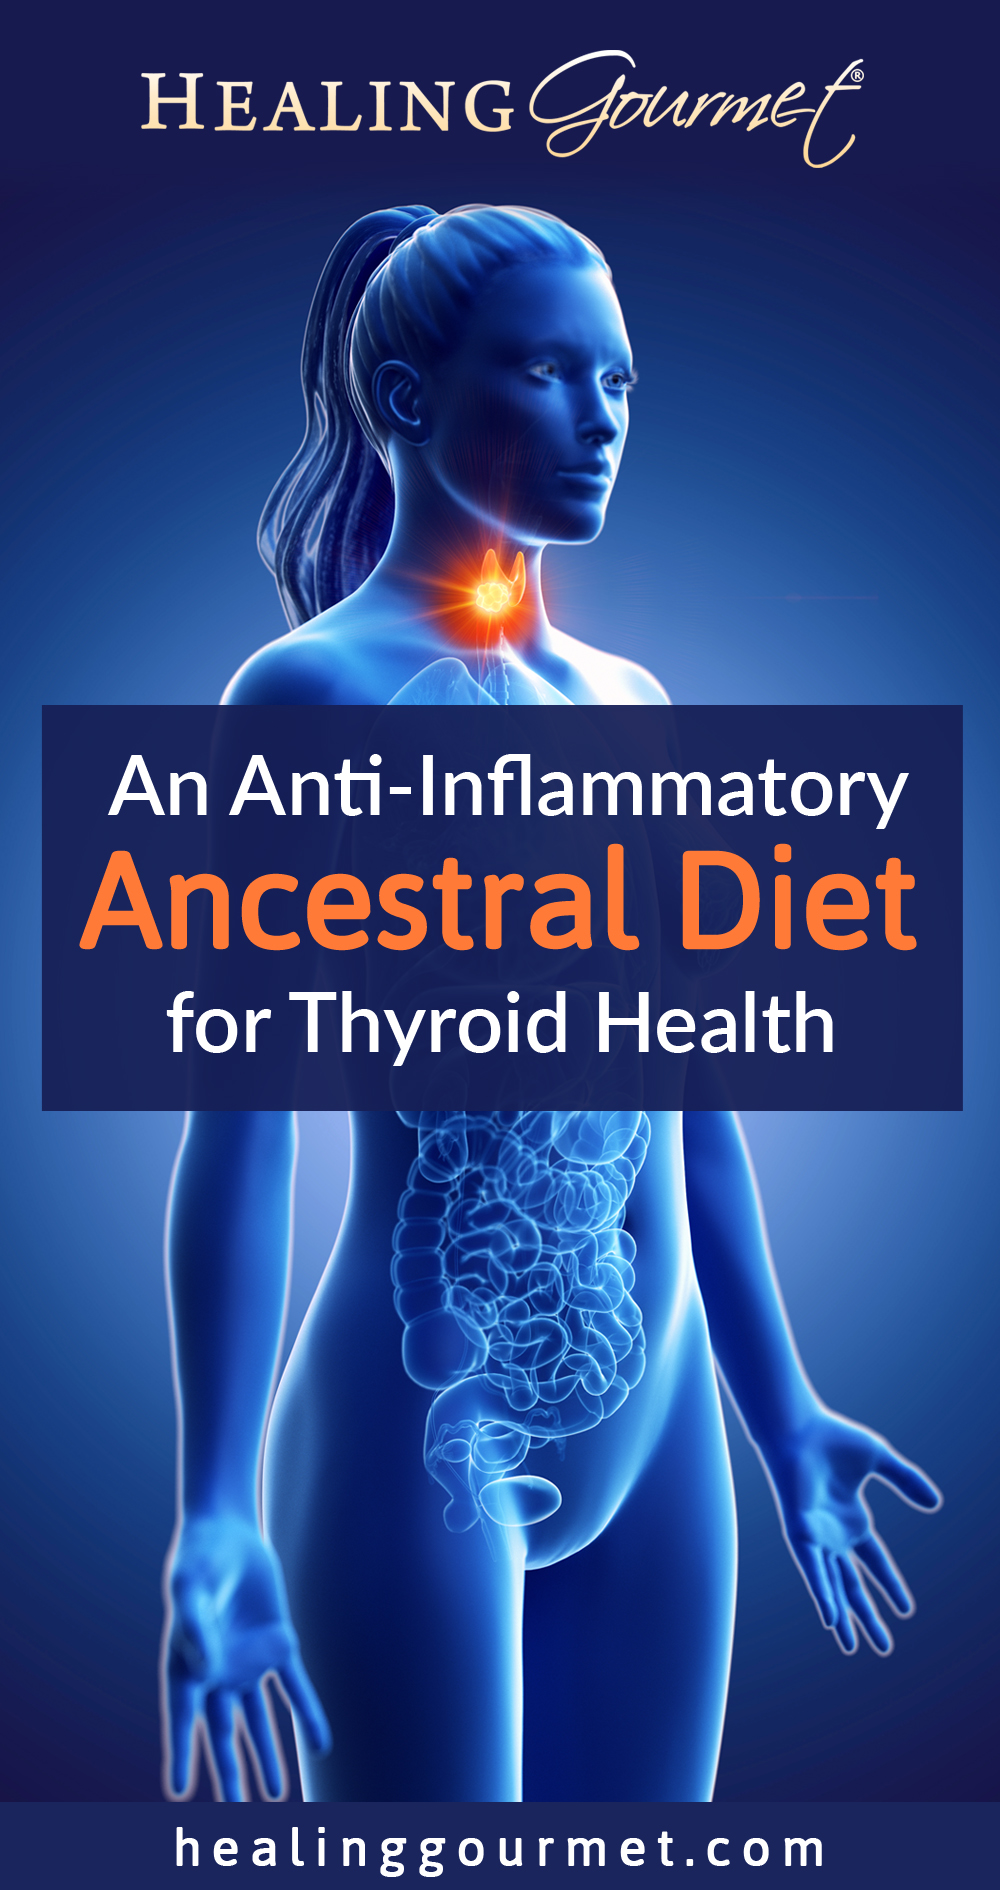 The Connection Between Thyroid Disease and Inflammation